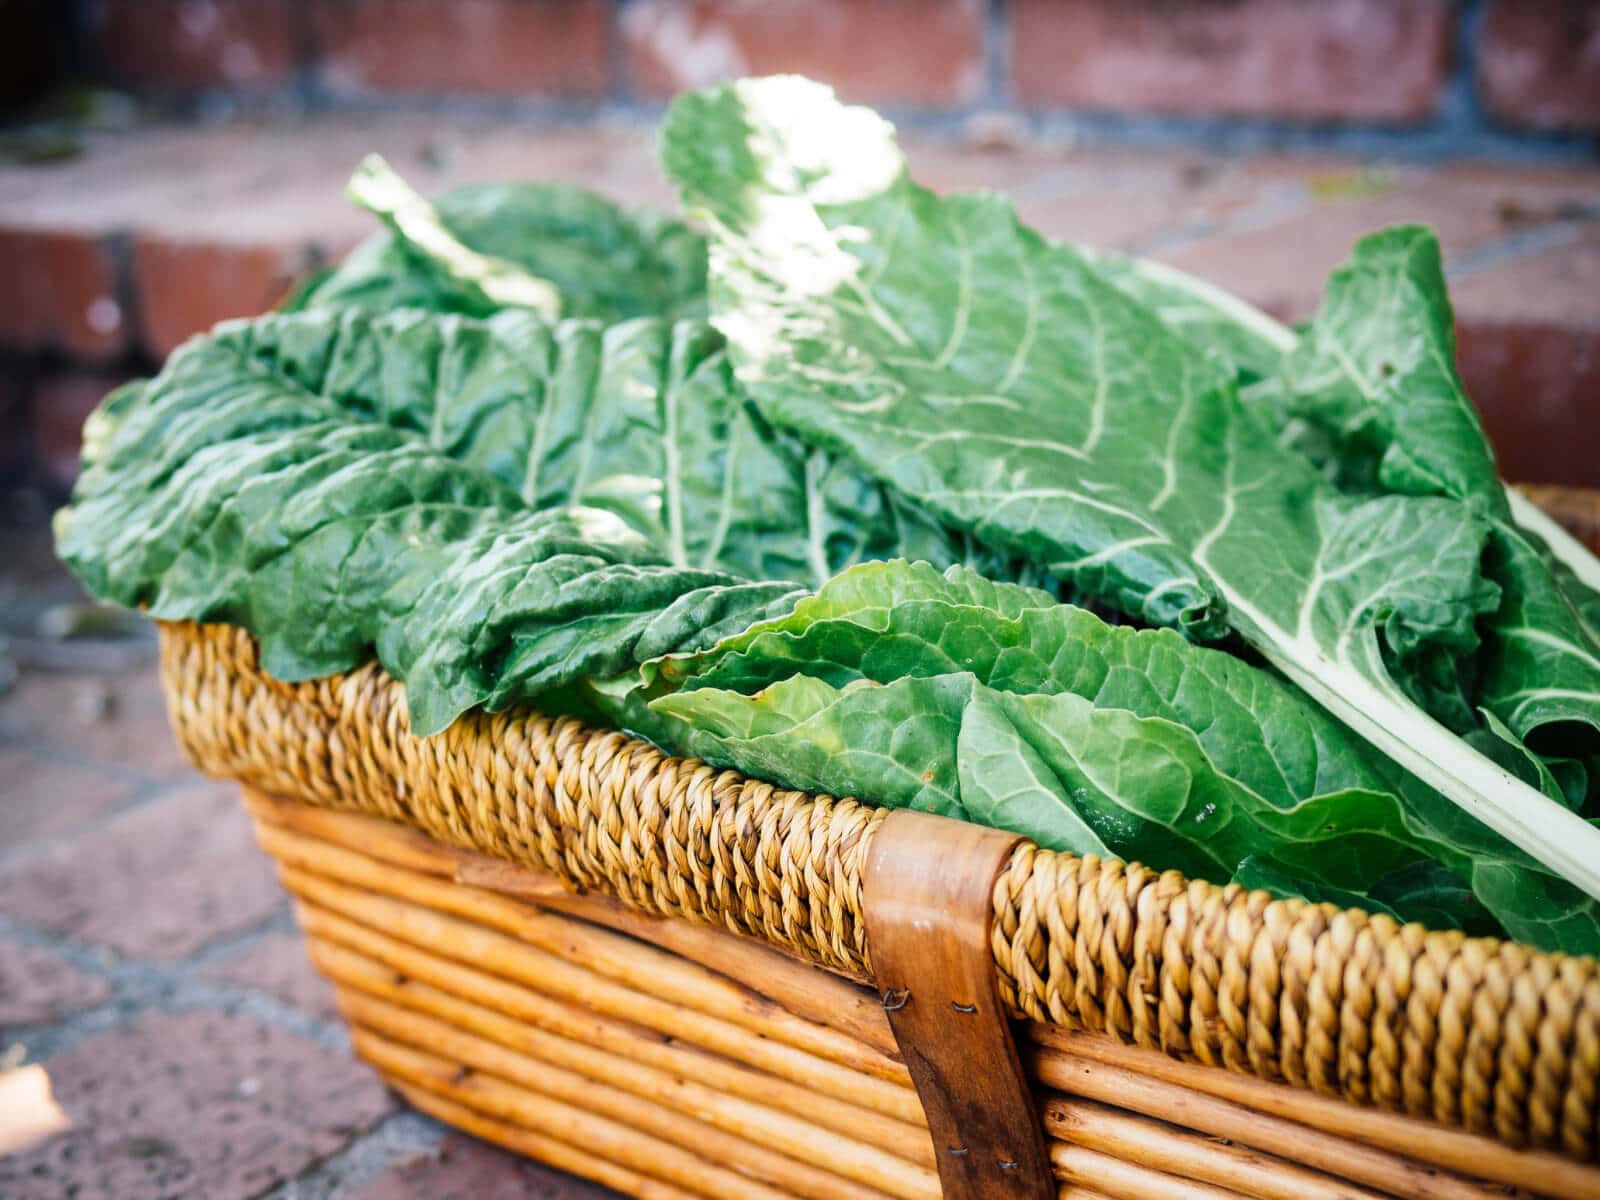 A steady supply of dark green leafy greens helps keep your chickens healthy in winter